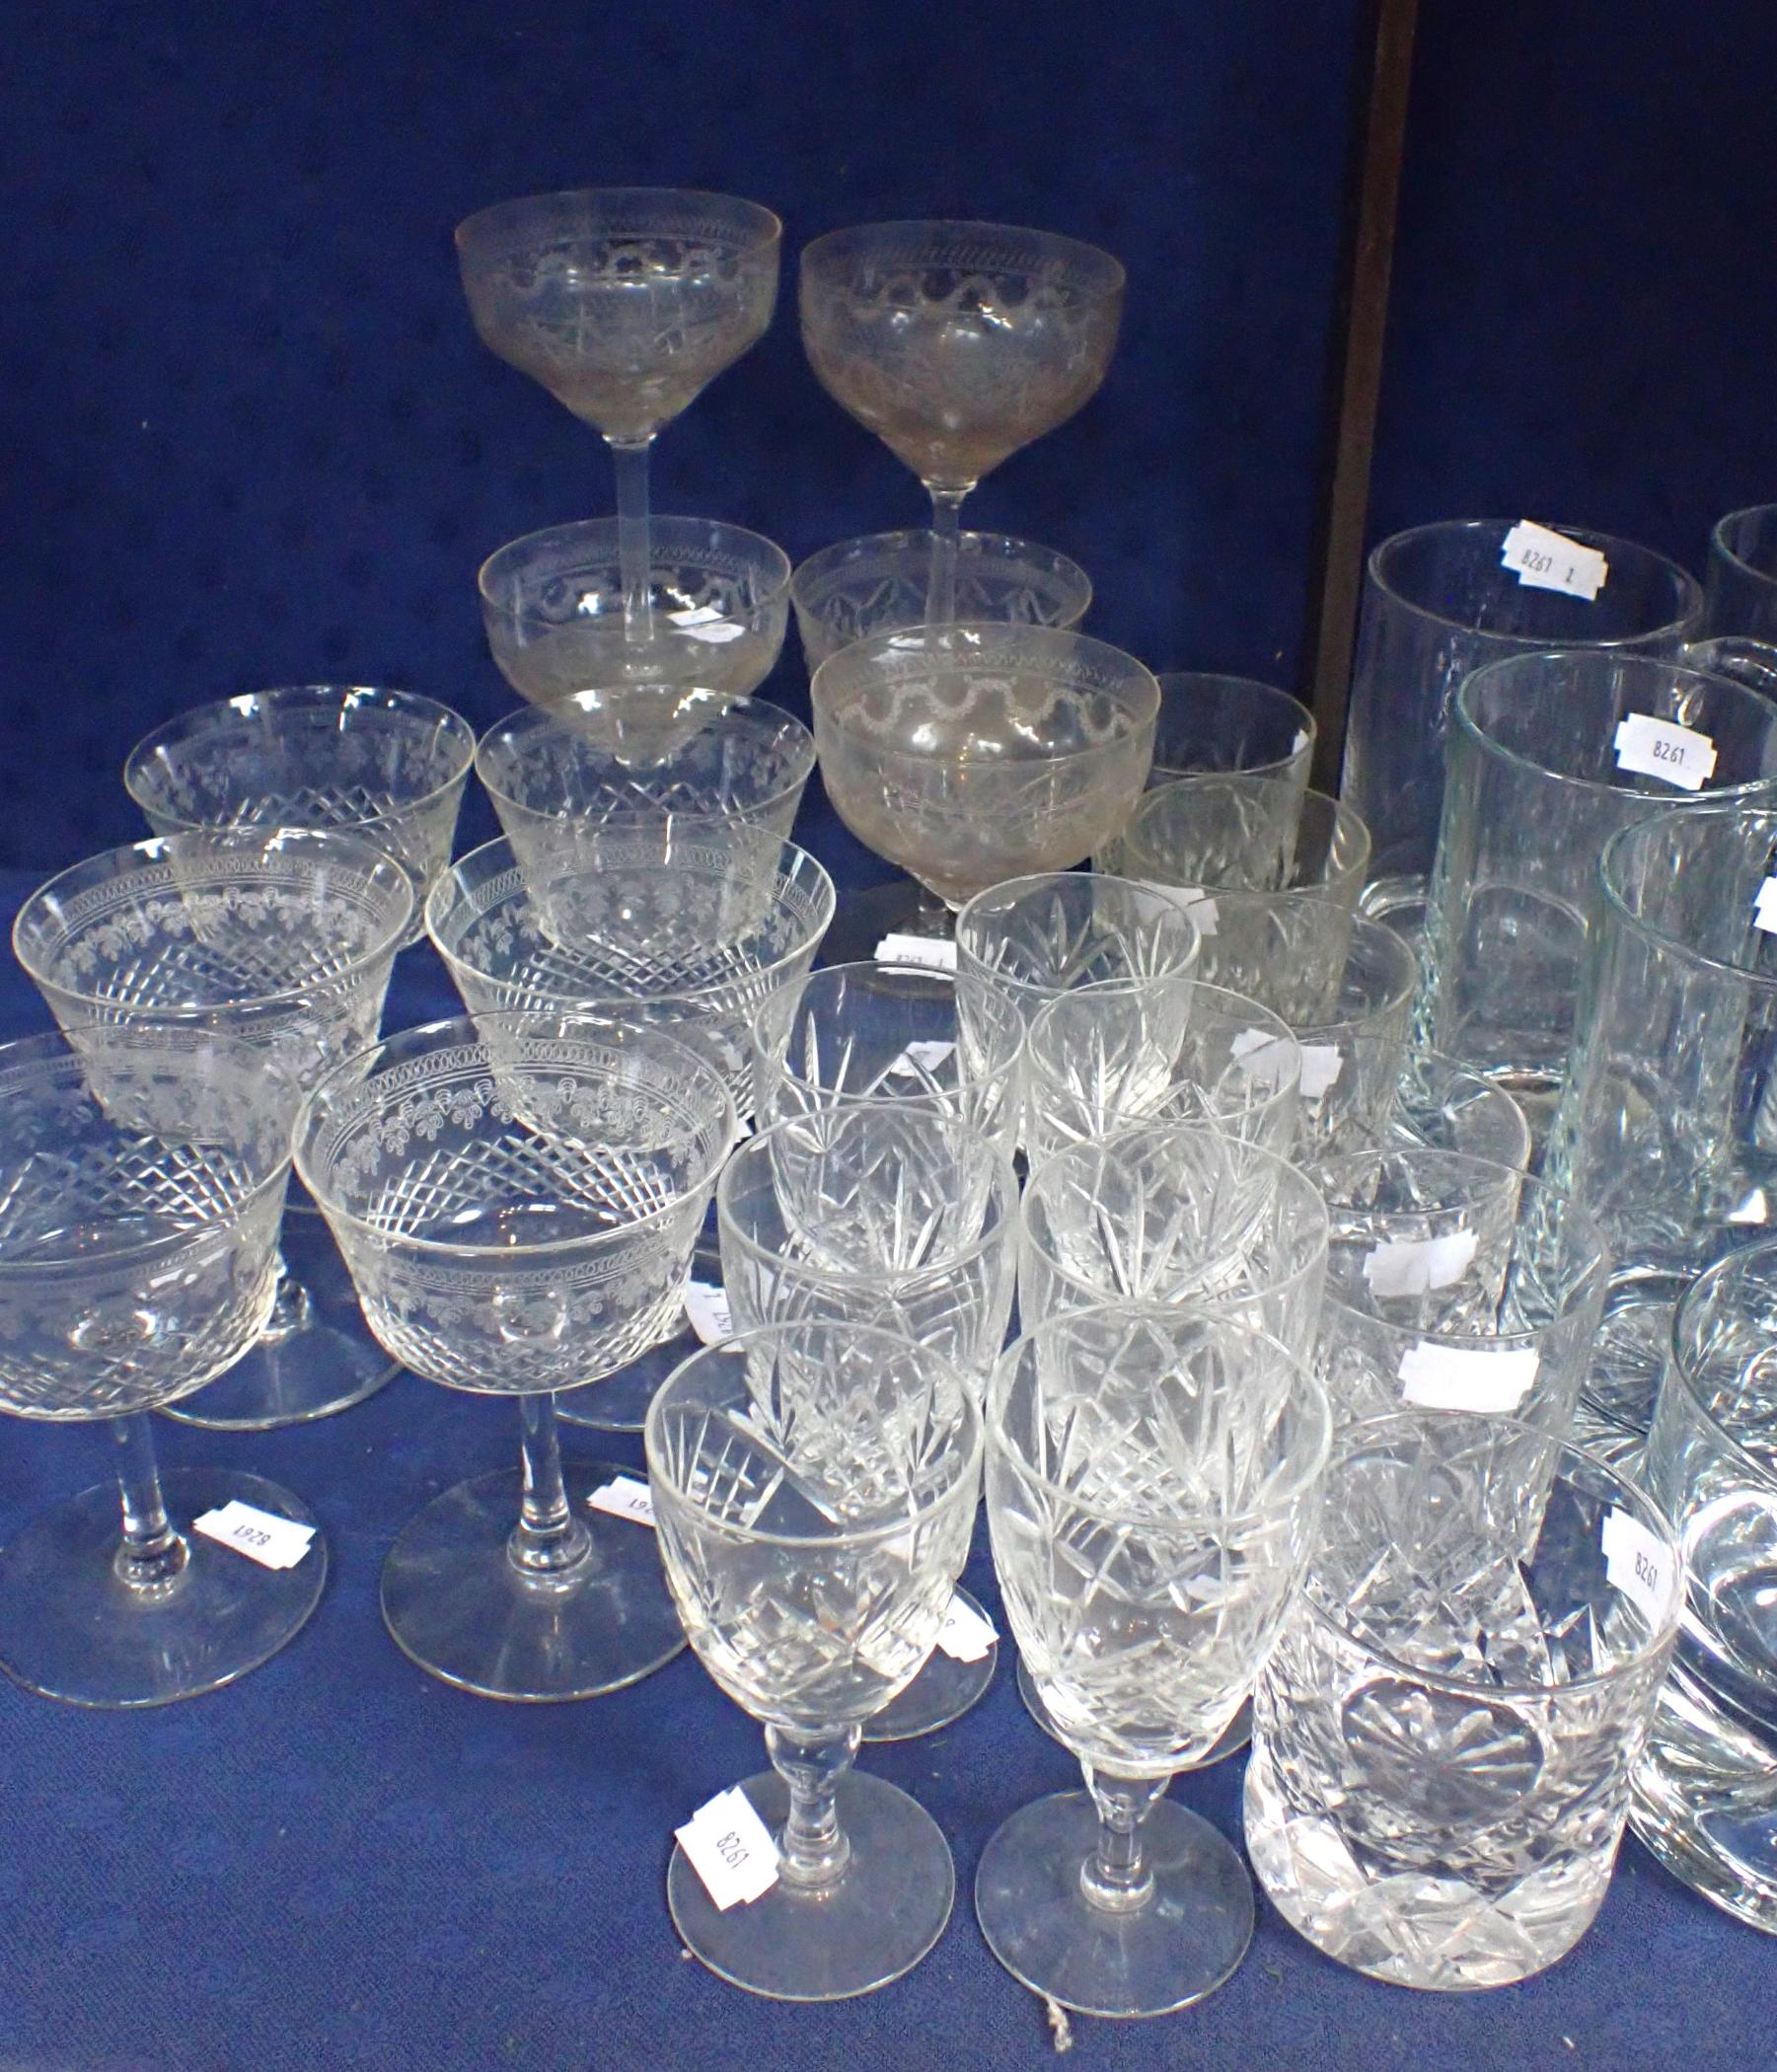 A COLLECTION OF GLASSWARE, INCLUDING CHAMPAGNE GLASSES - Image 3 of 3